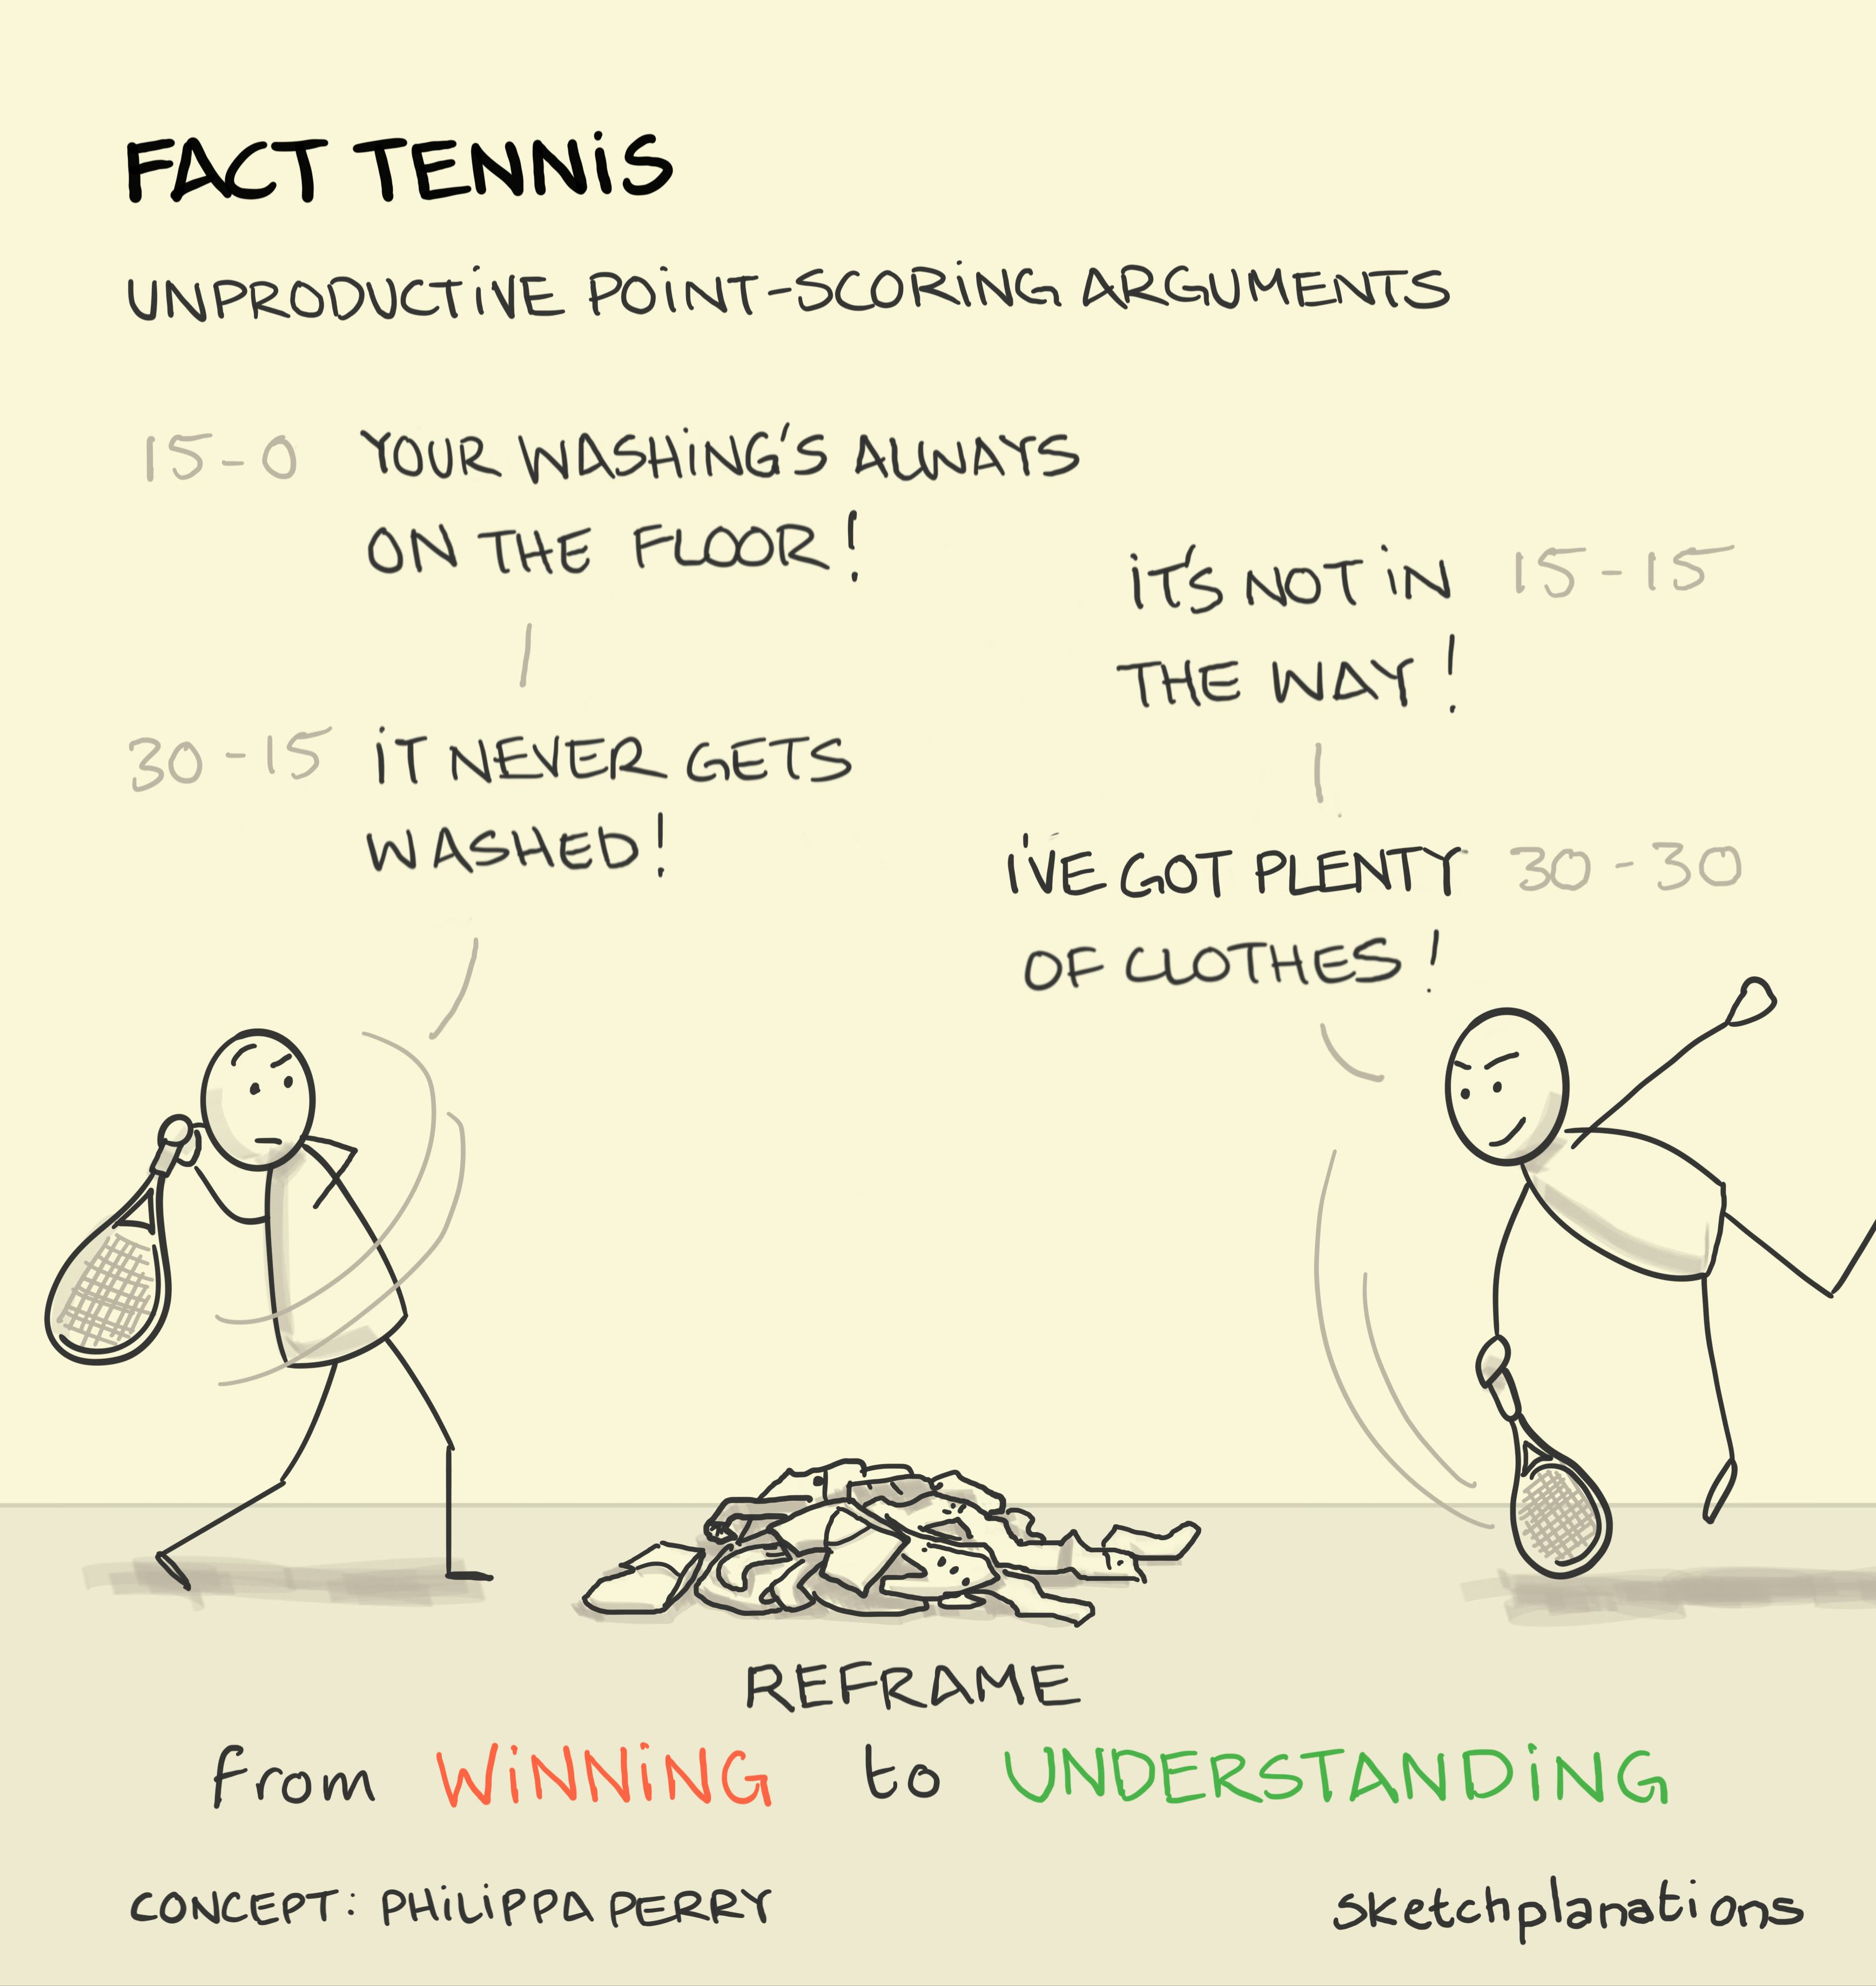 Fact Tennis illustration: two individuals with tennis racquets knock unproductive, point-scoring arguments back and forth over a pile of laundry. 